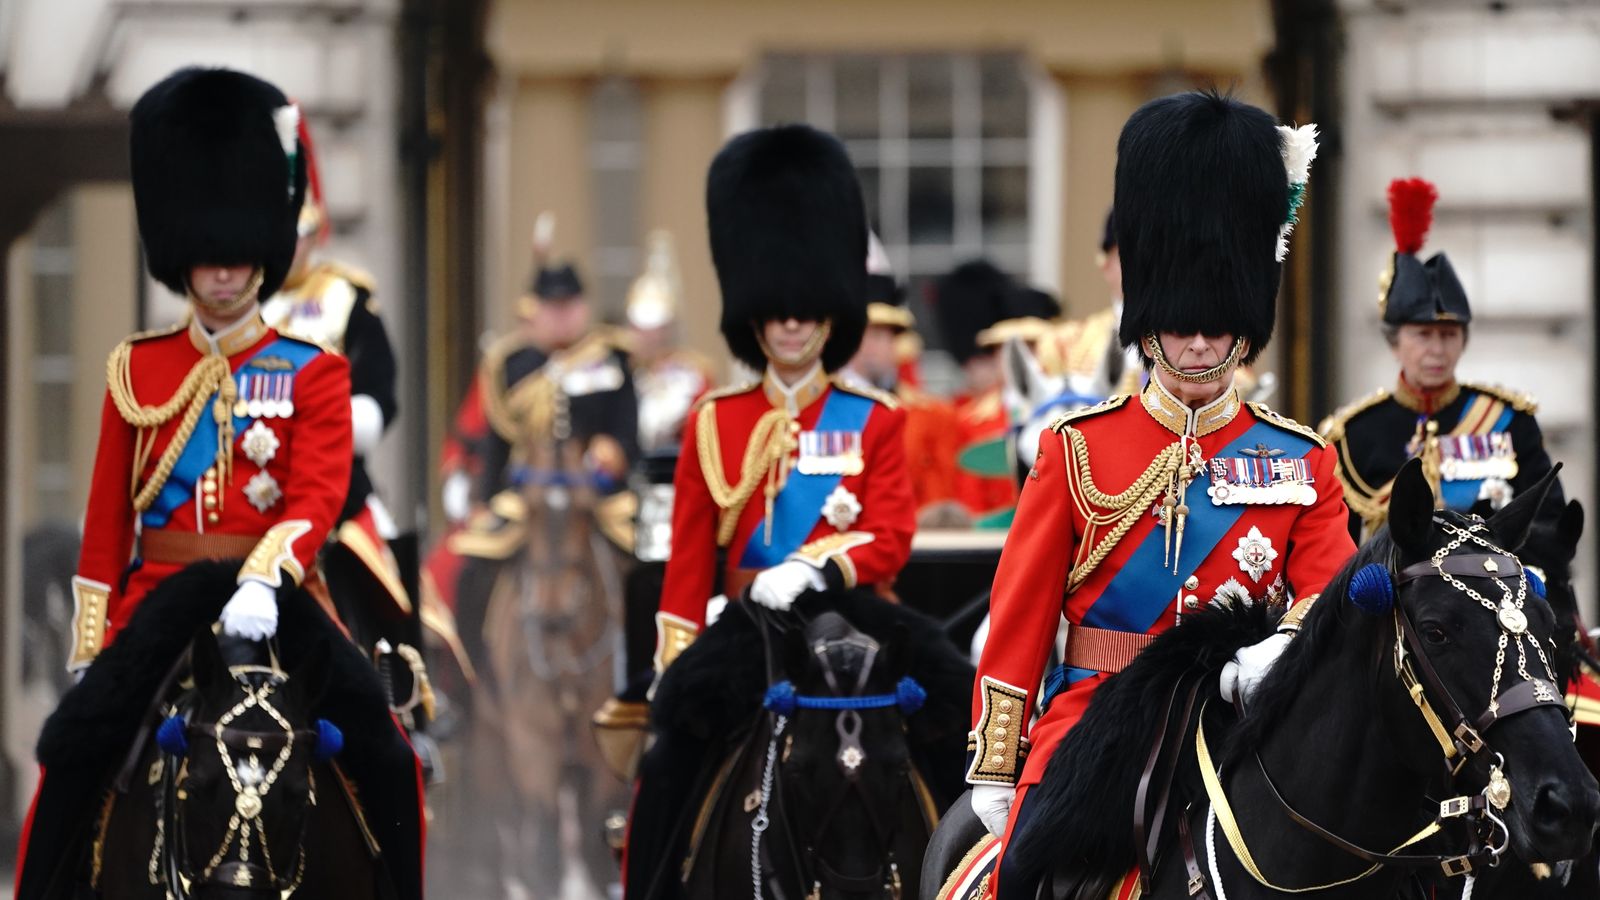 Trooping the Colour King joined by royals for his first Trooping the